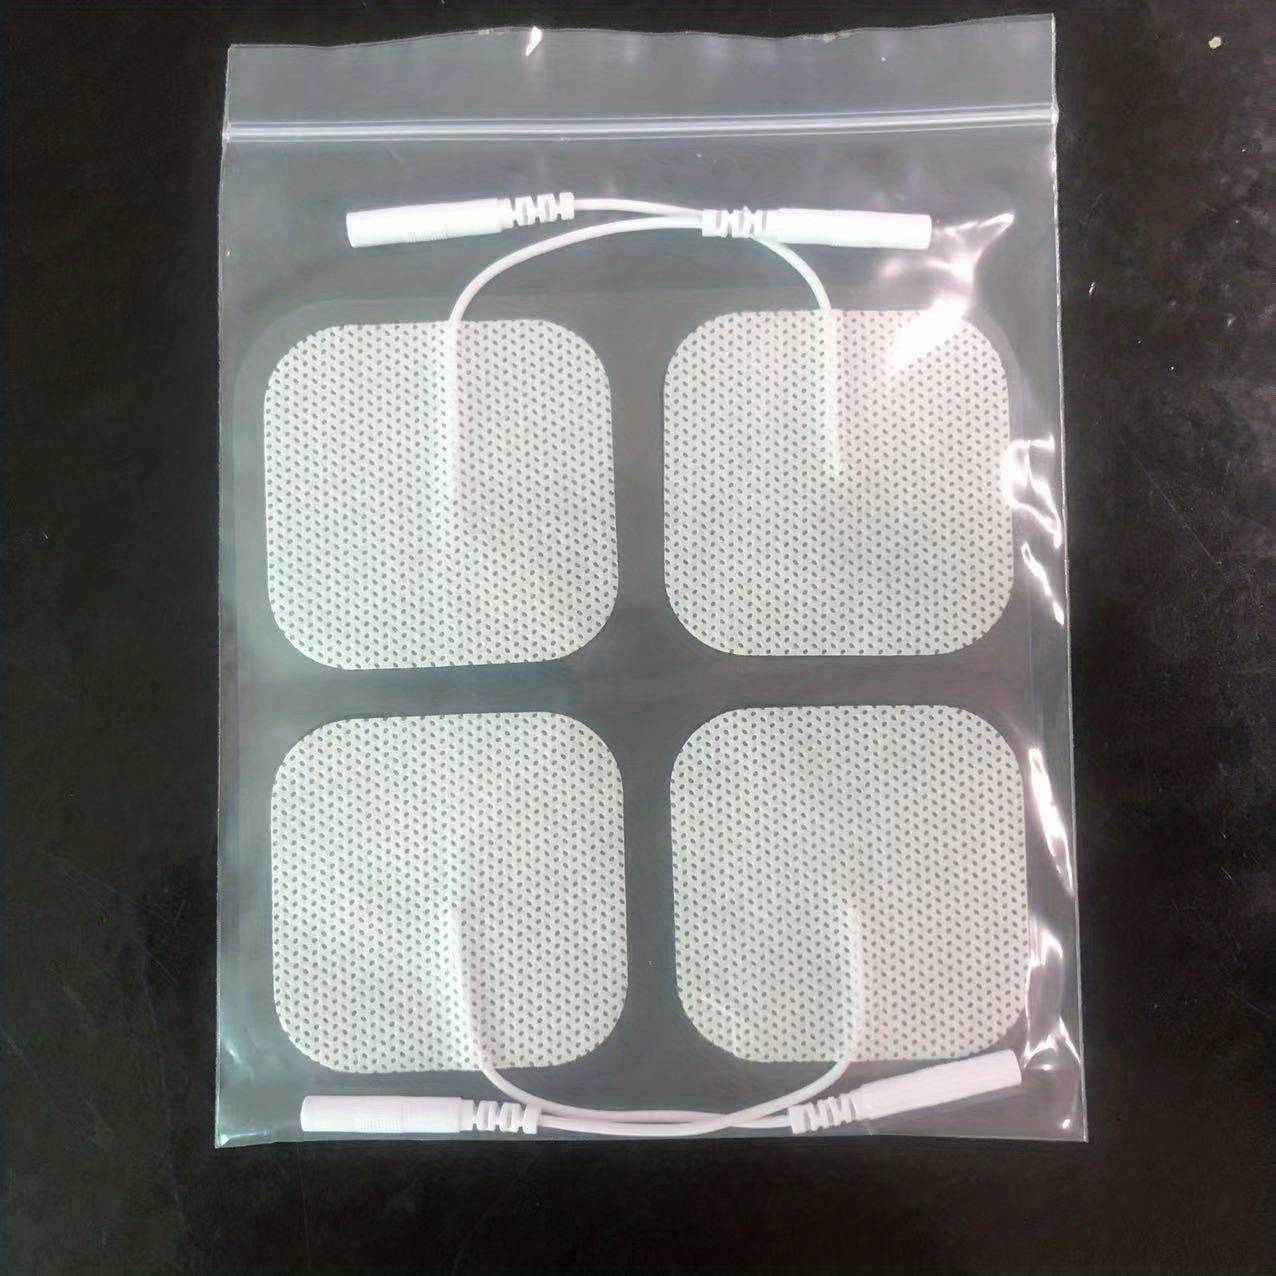 Tens Unit Replacement Pads,reusable Self-adhesive Replacement